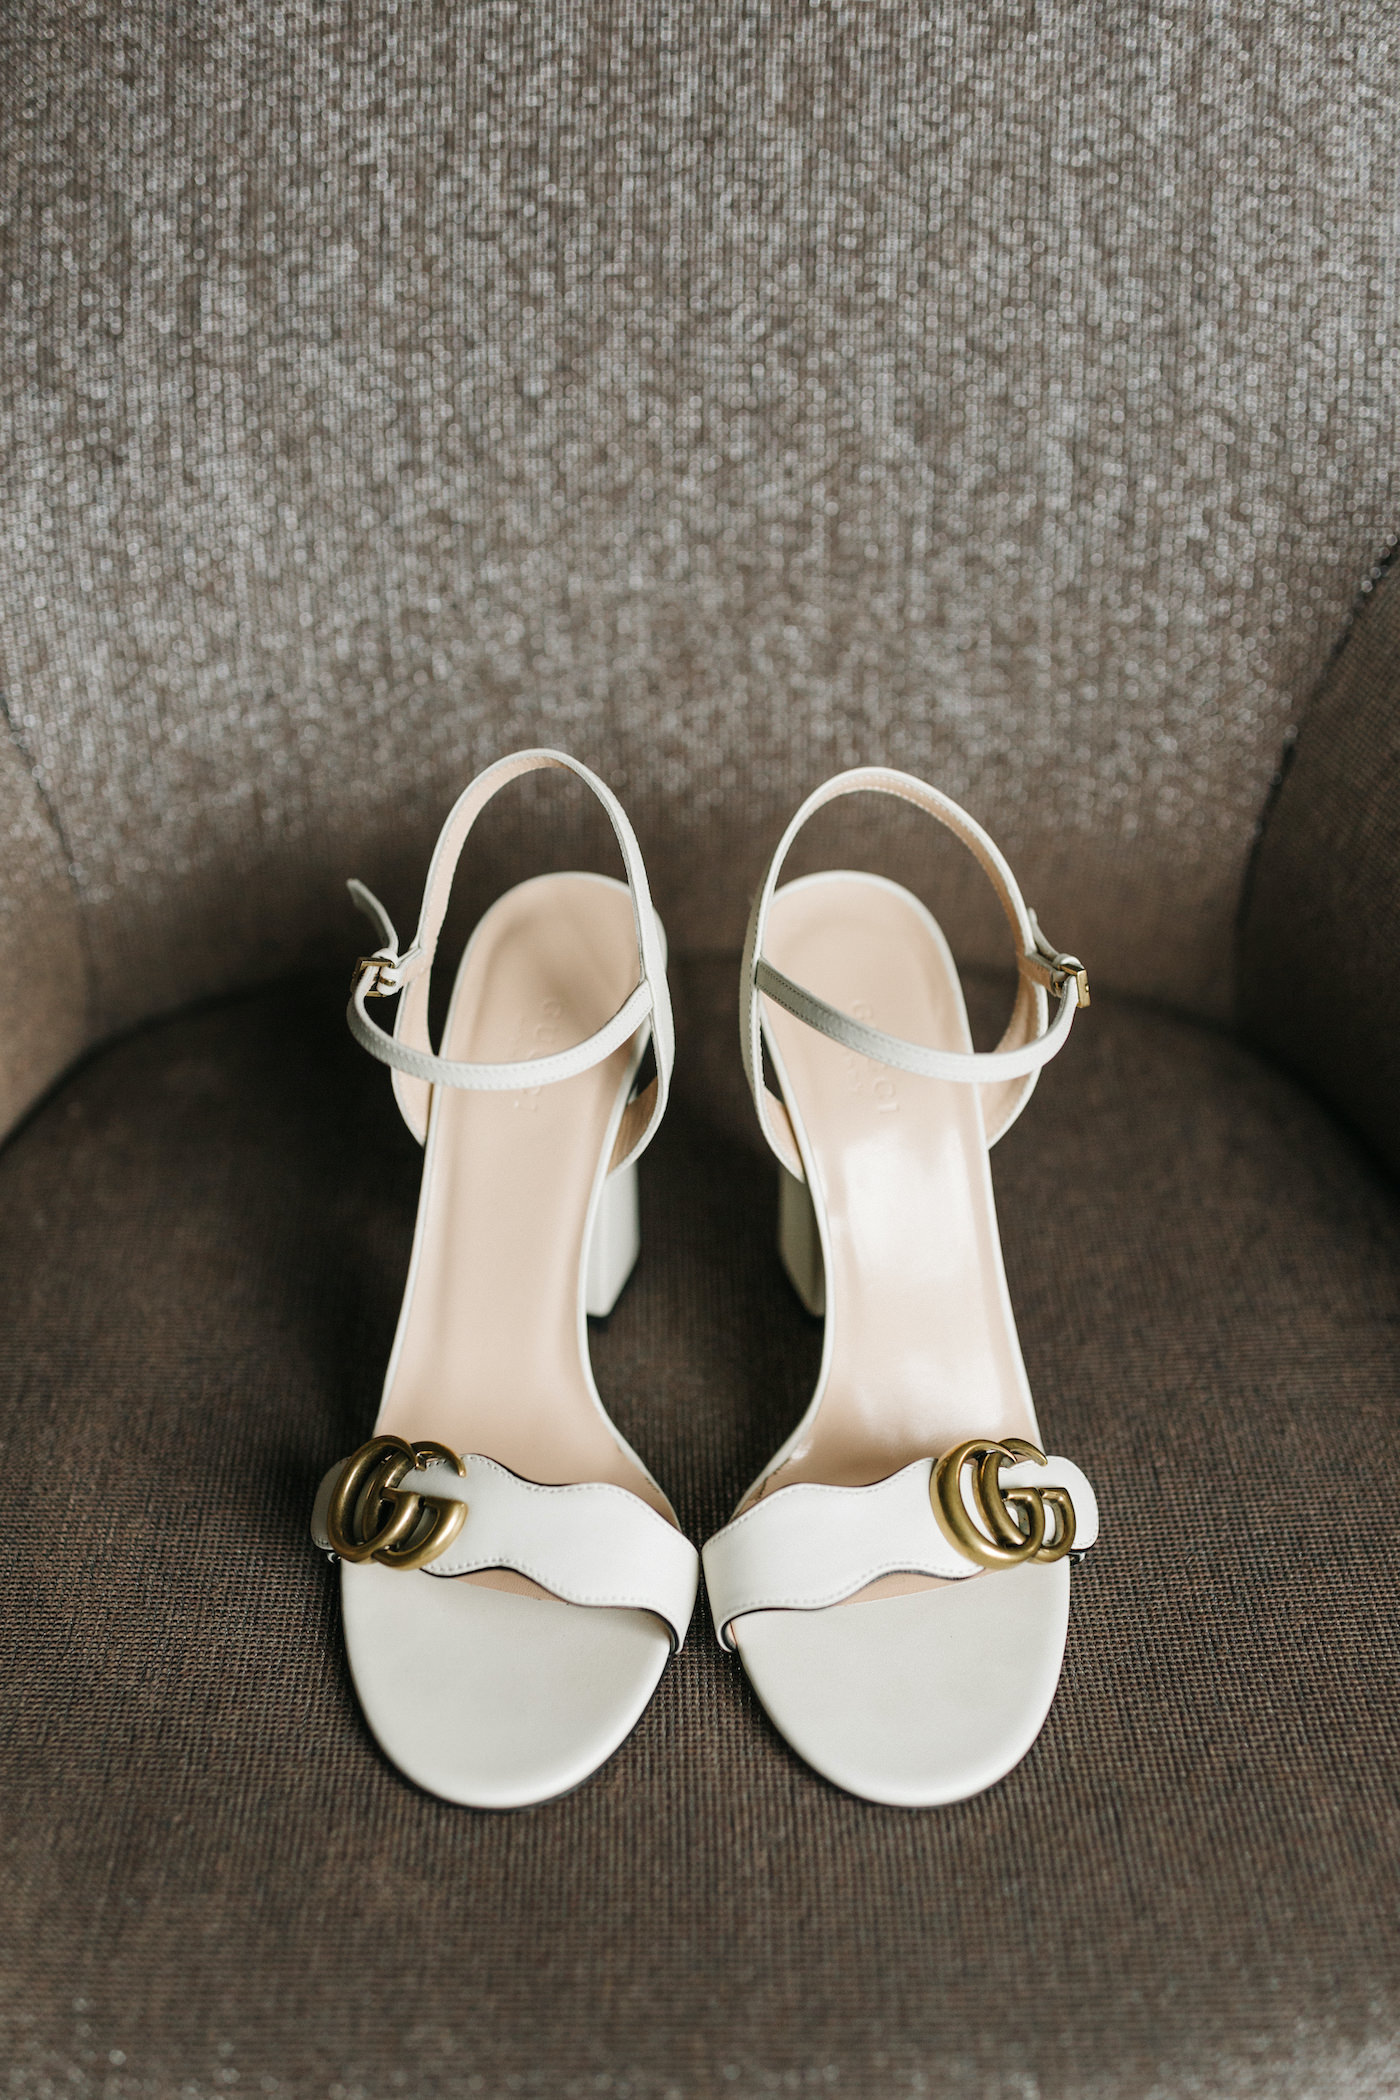 Gucci Designer Bridal Wedding Shoes | White Open Toe Ankle Strap Gucci Heels